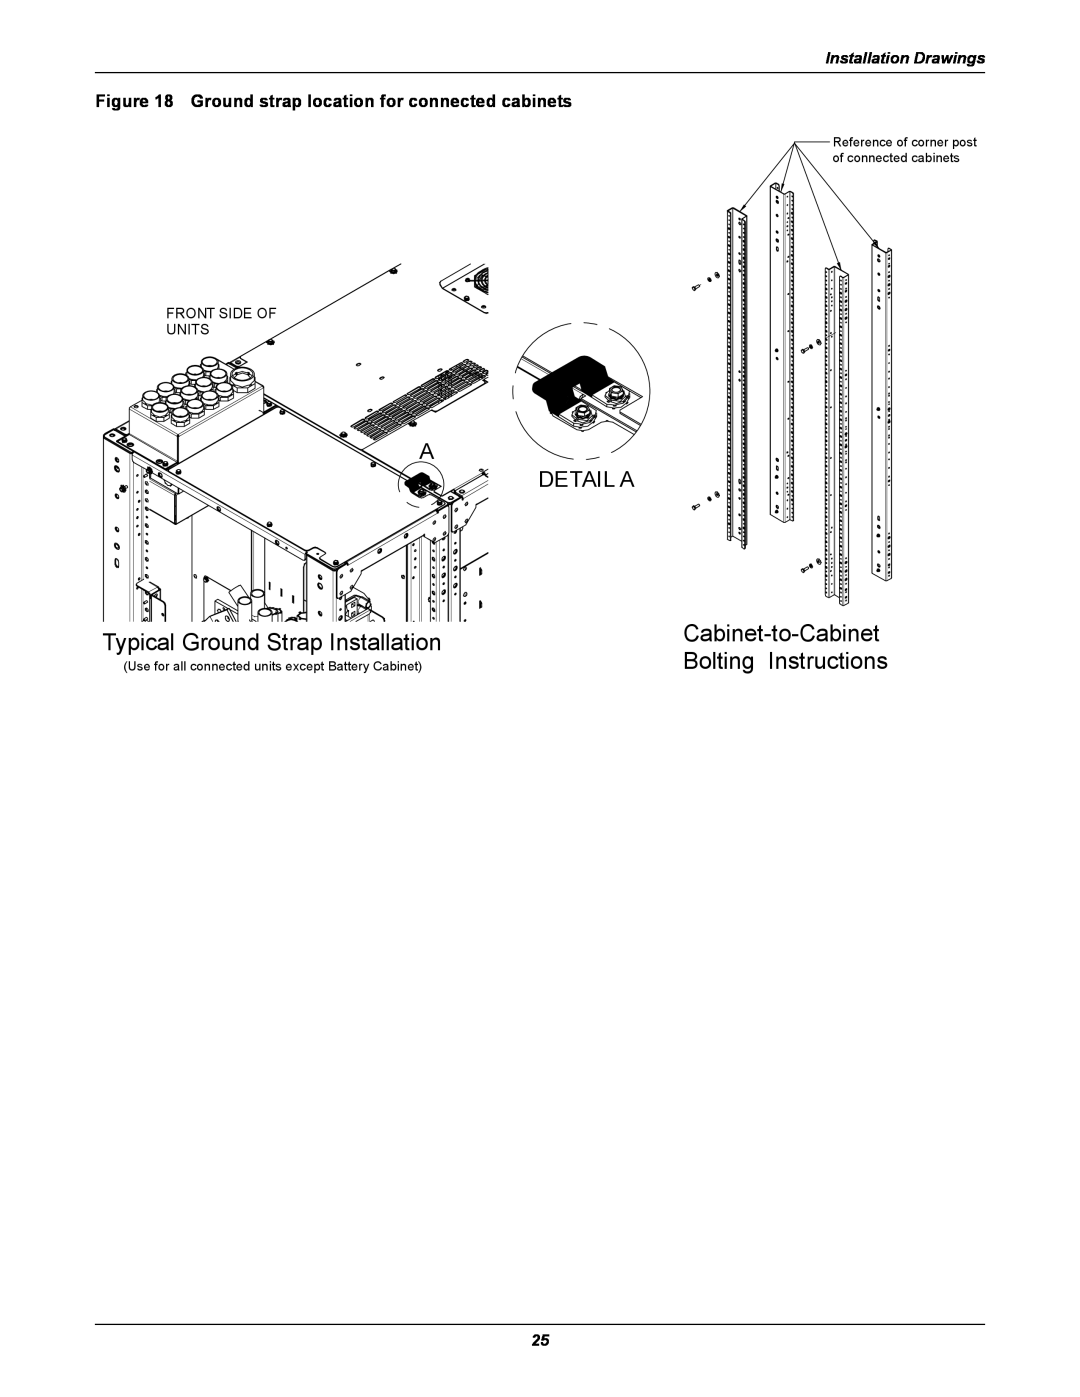 Emerson UPS Systems Cabinet-to-Cabinet, Bolting Instructions, A Detail A, Typical Ground Strap Installation 